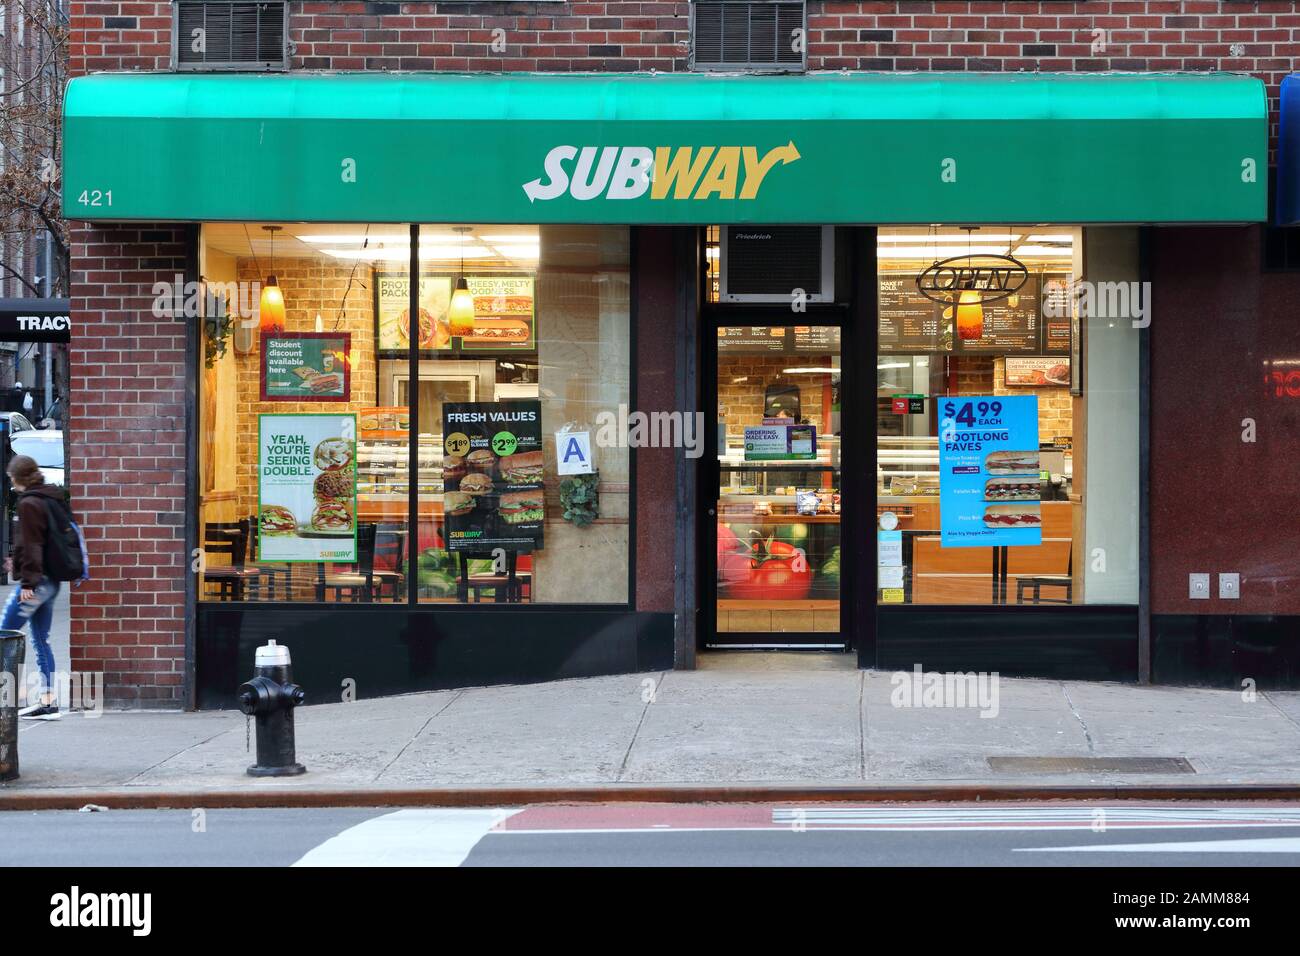 [historical storefront] Subway Restaurant, 421 2nd Ave, New York, NYC storefront photo of a sandwich shop chain restaurant in Manhattan. Stock Photo